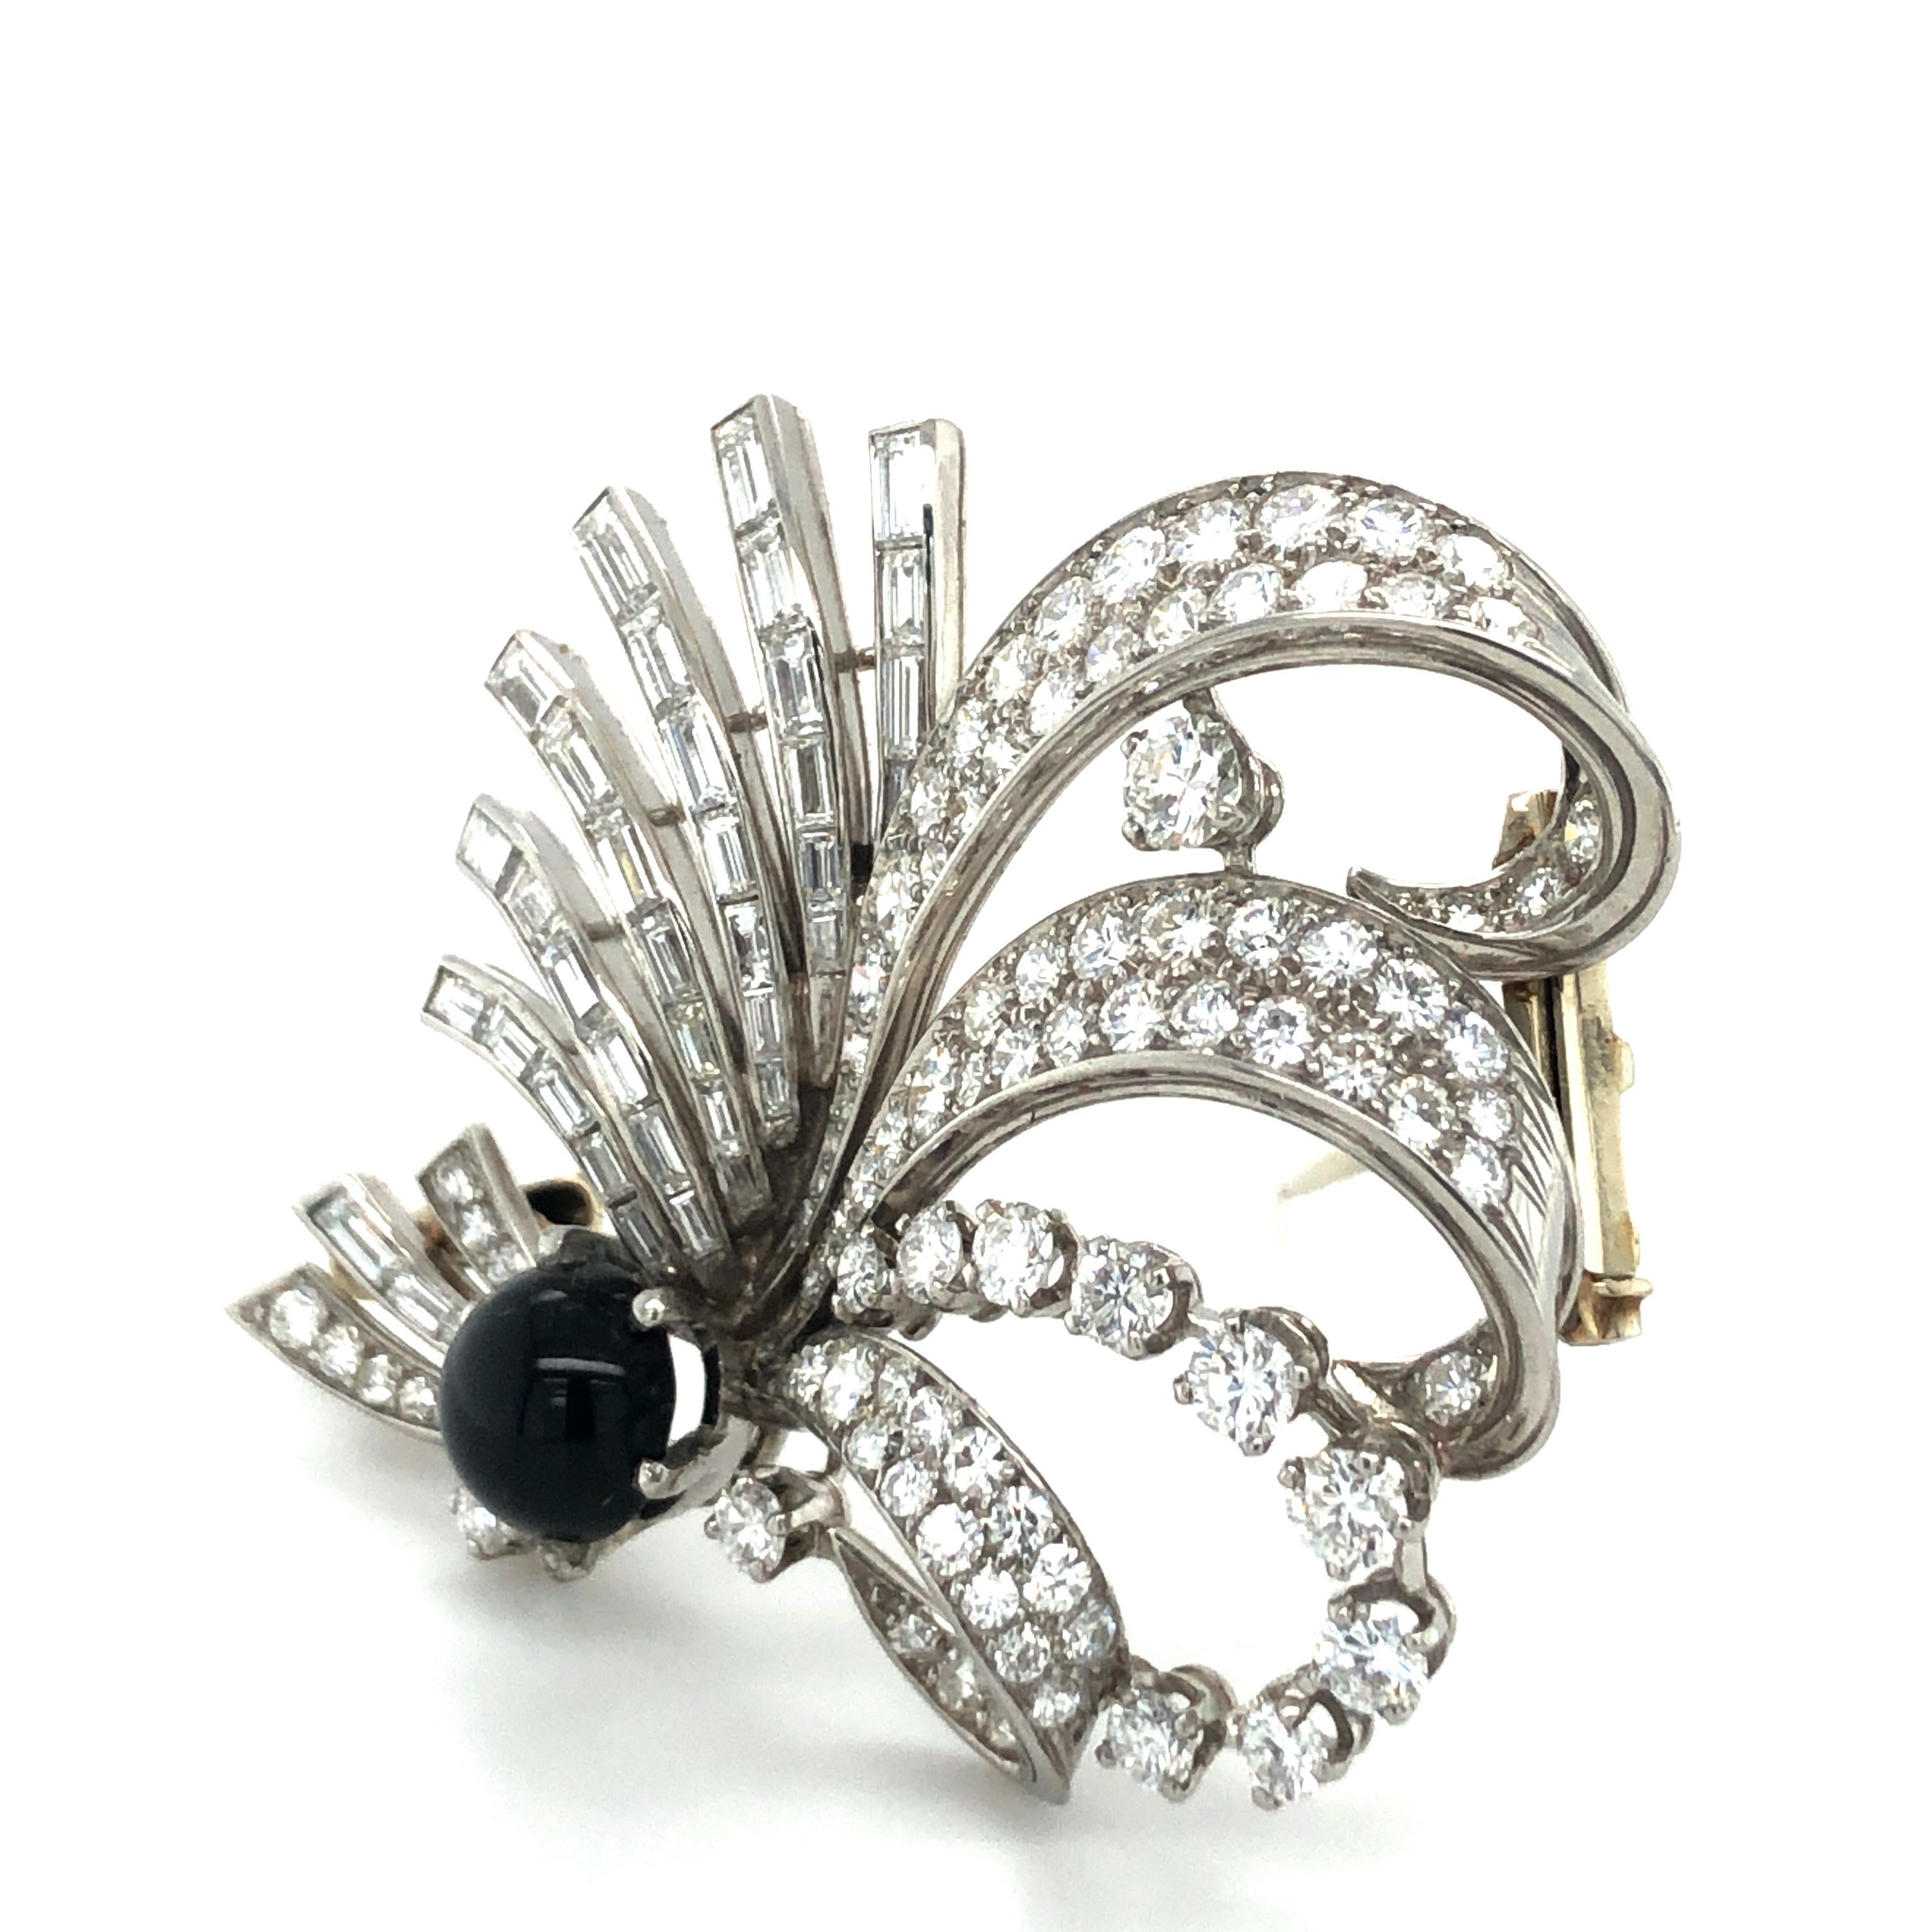 The designer of this brooch might have thought of those wonderfully curved ostrich feathers at least it reminds me of it. A very extravagant combination of different setting techniques and diamond cuts creates the lightness of this jewel. 39